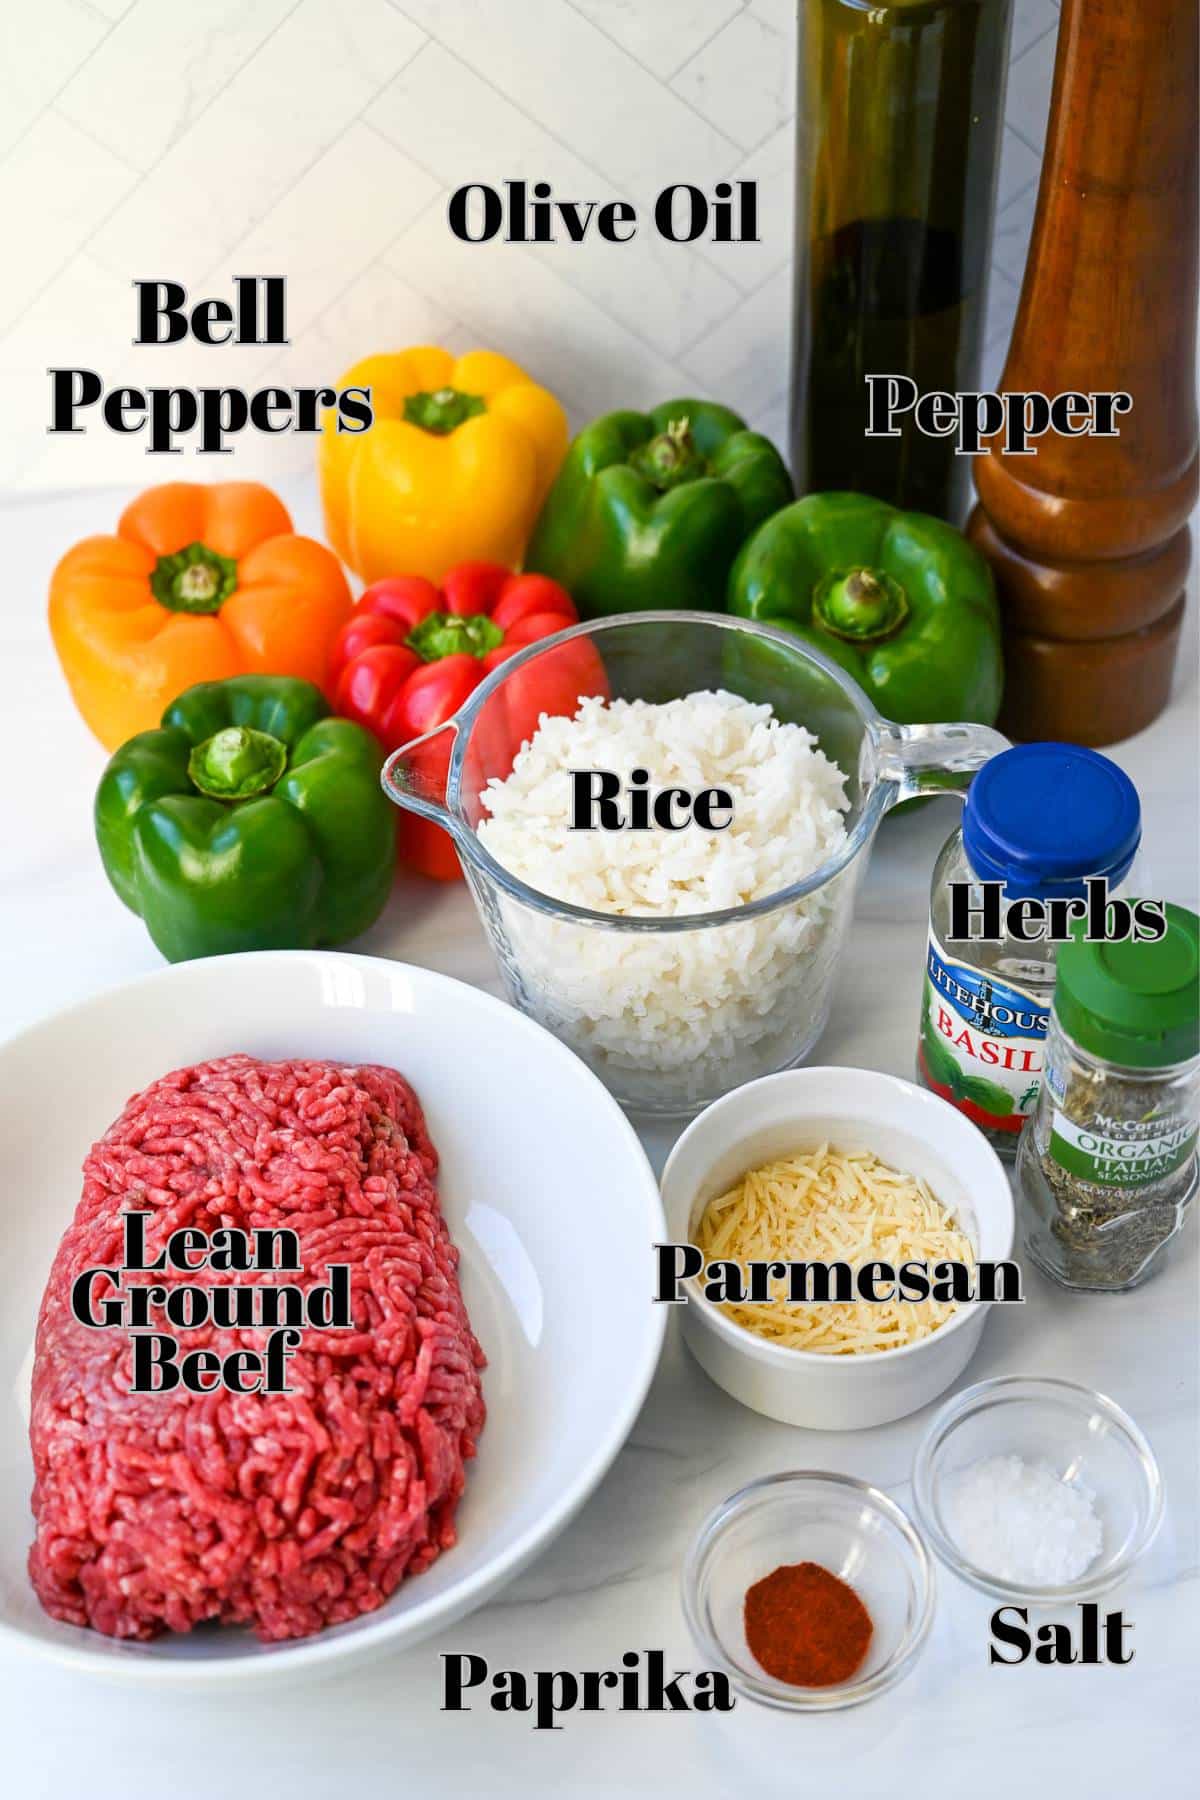 Stuffed pepper ingredients measured out on a counter